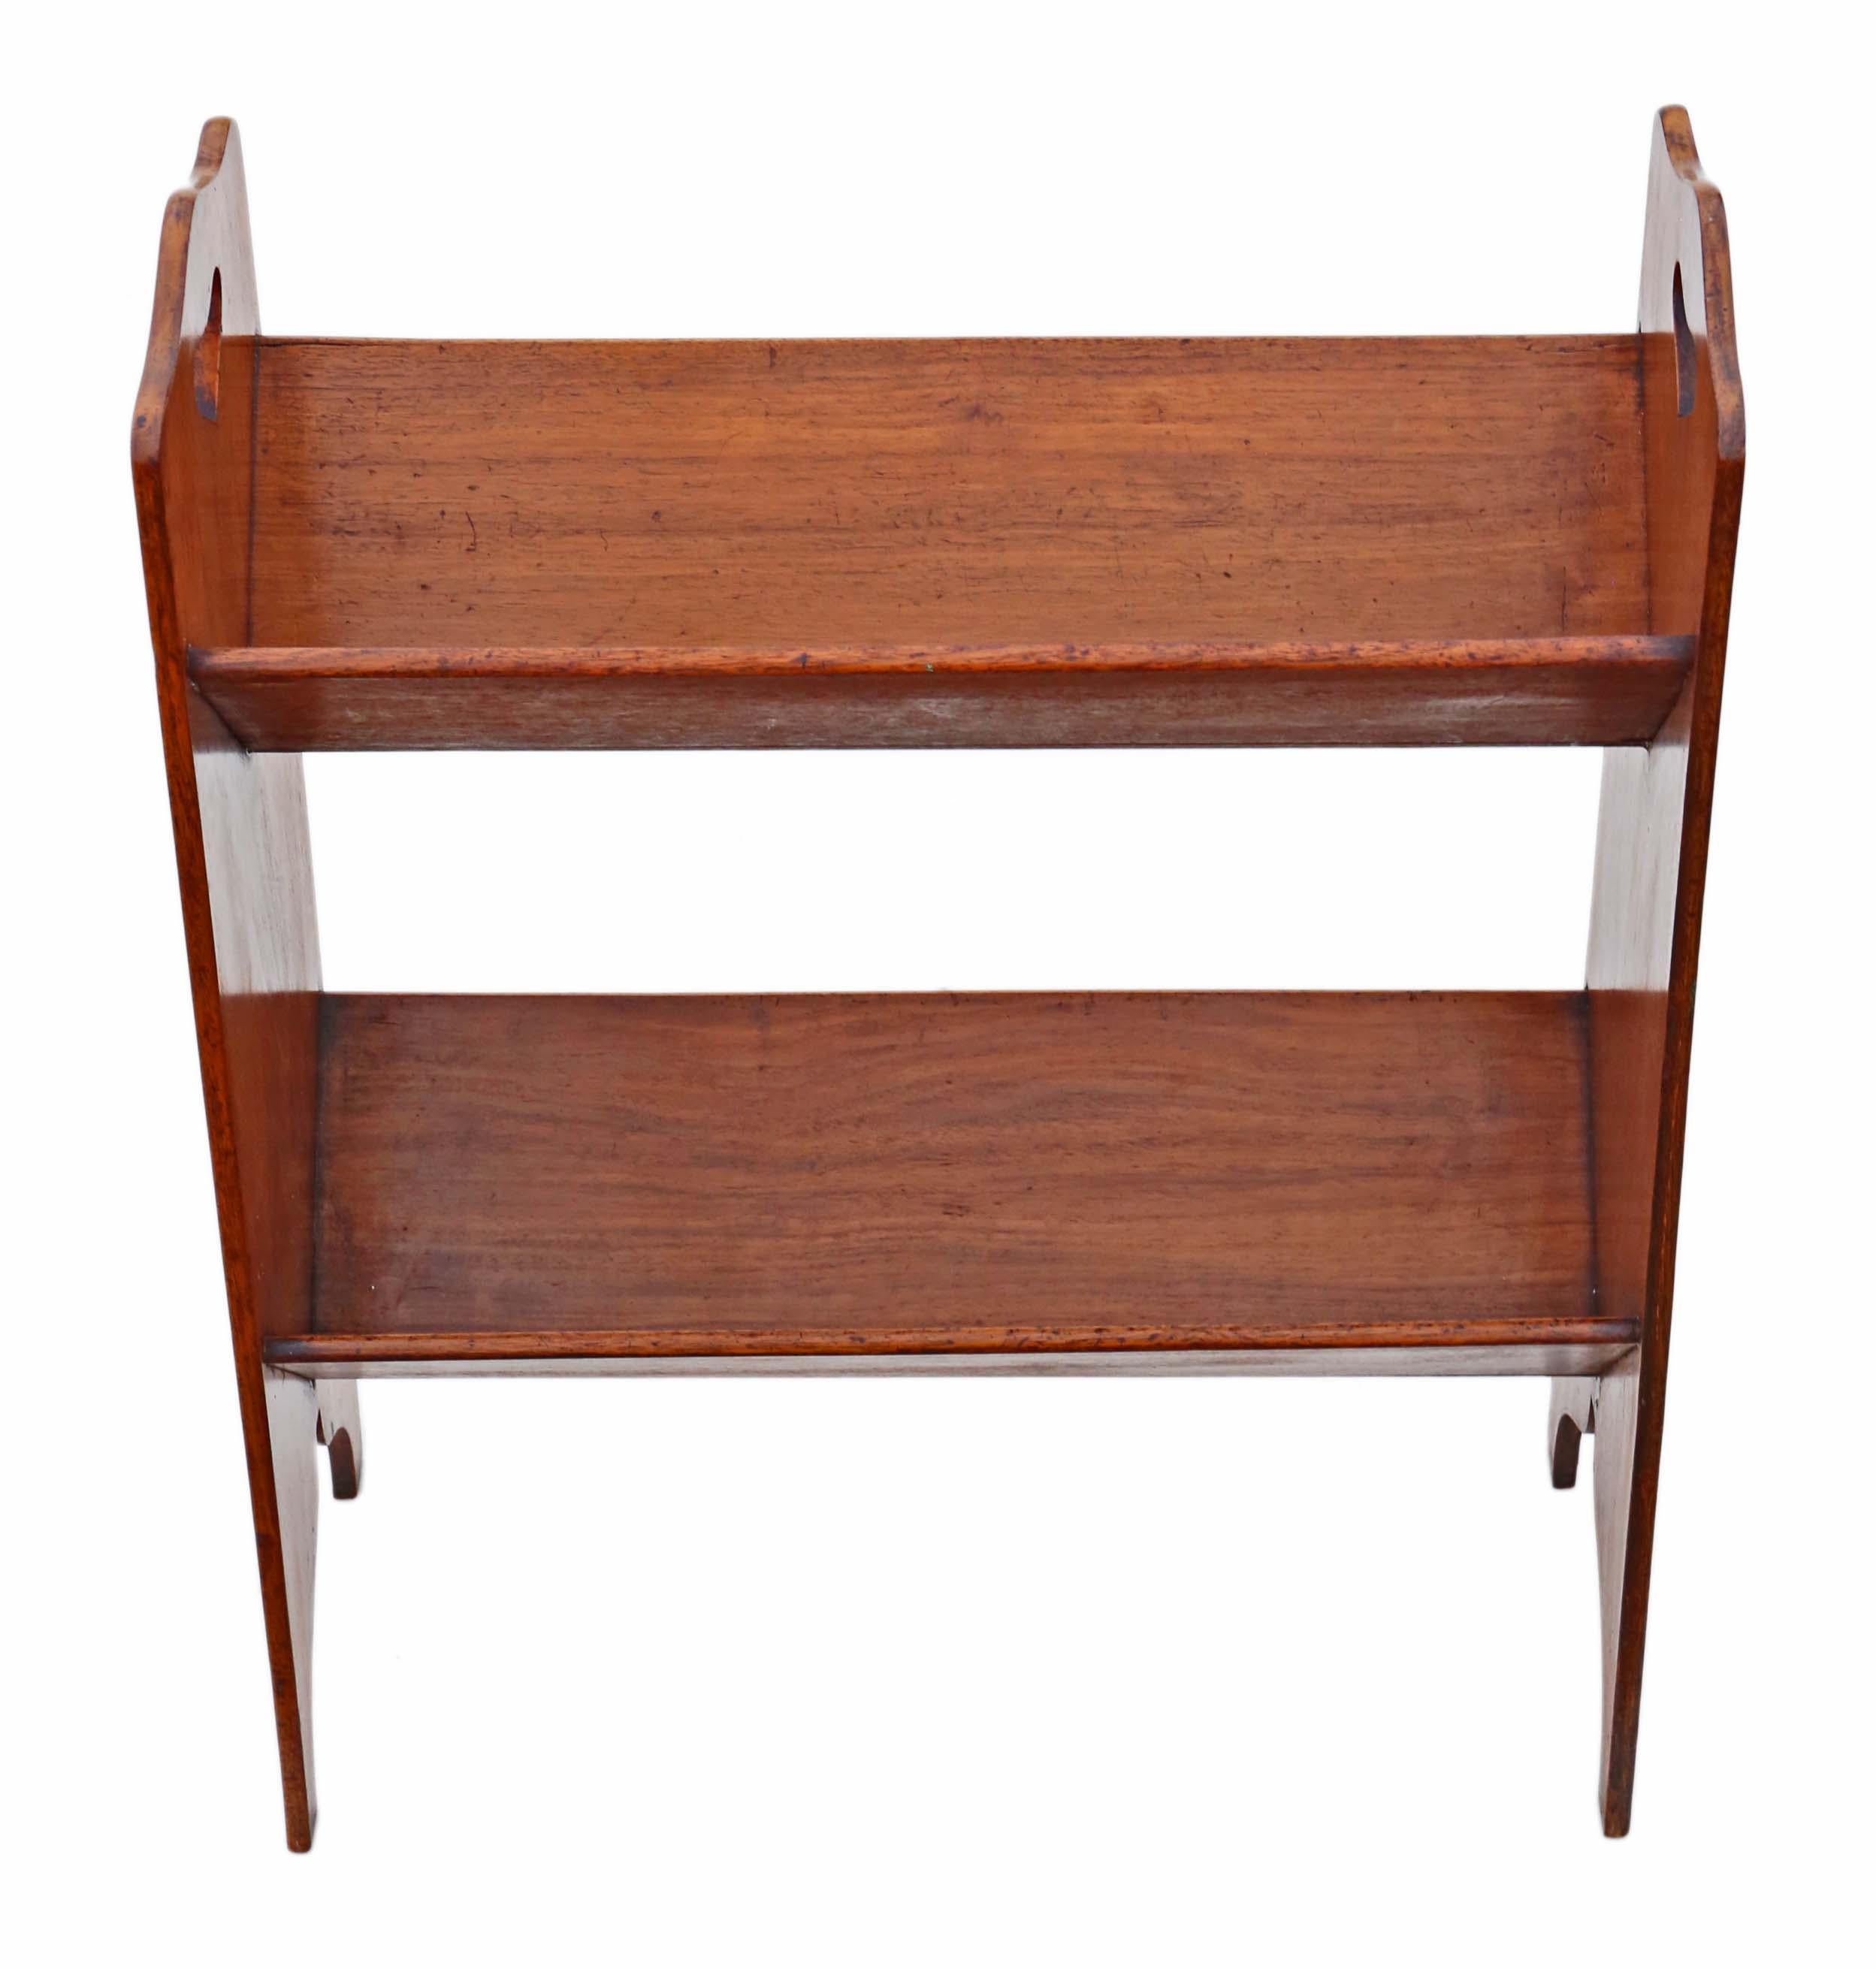 Antique quality Art Nouveau mahogany bookcase, book trough or stand C1910.

Solid and strong, with no loose joints and no woodworm. A lovely quality piece.

Would look great in the right location!

Overall maximum dimensions: 54cmW x 24cmD x